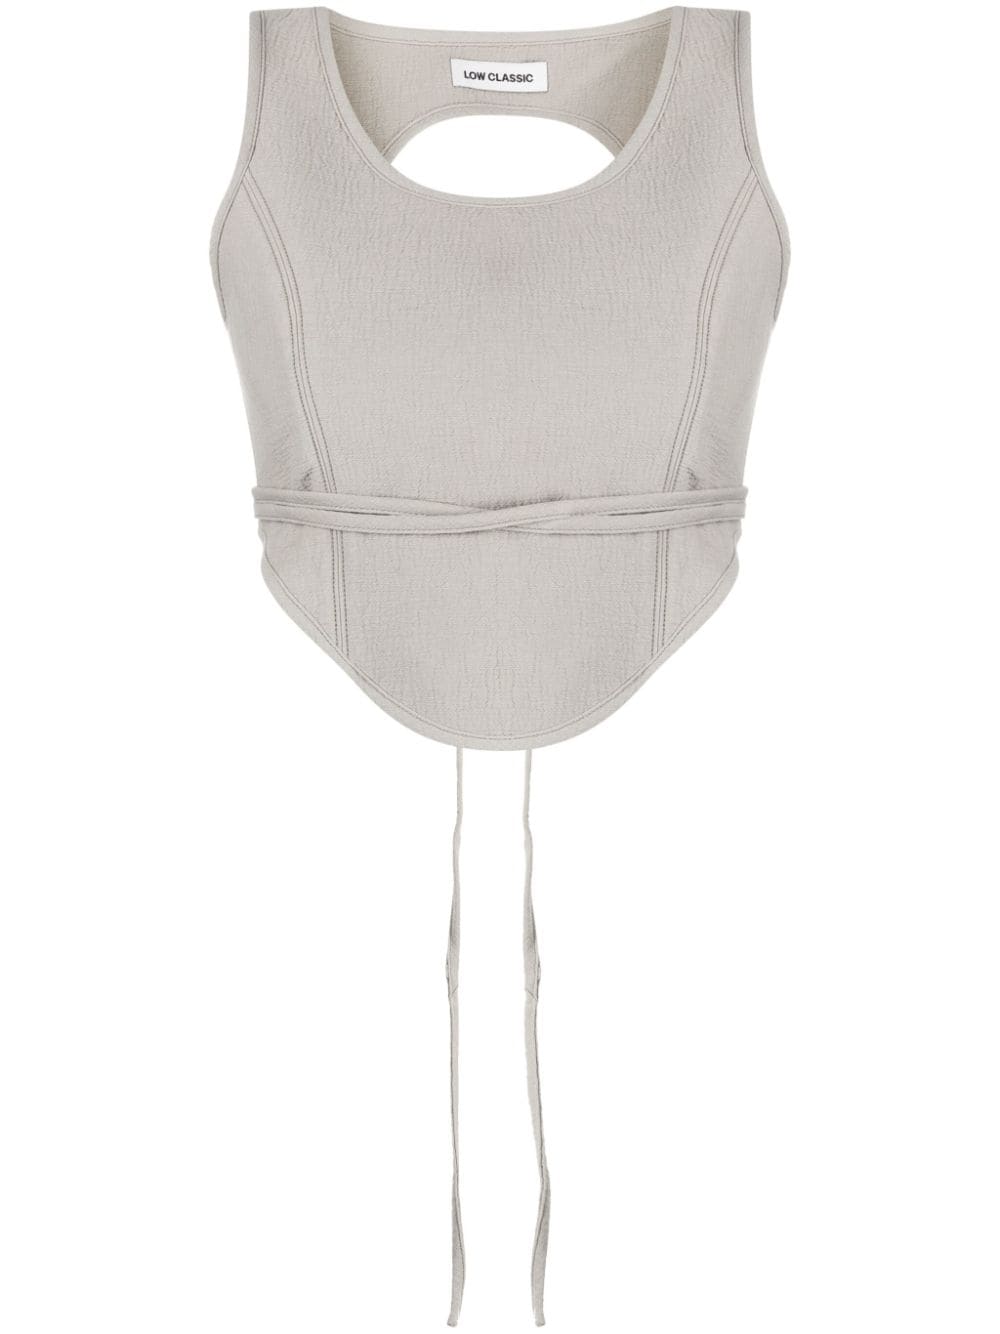 Low Classic cropped corset top - Marrone